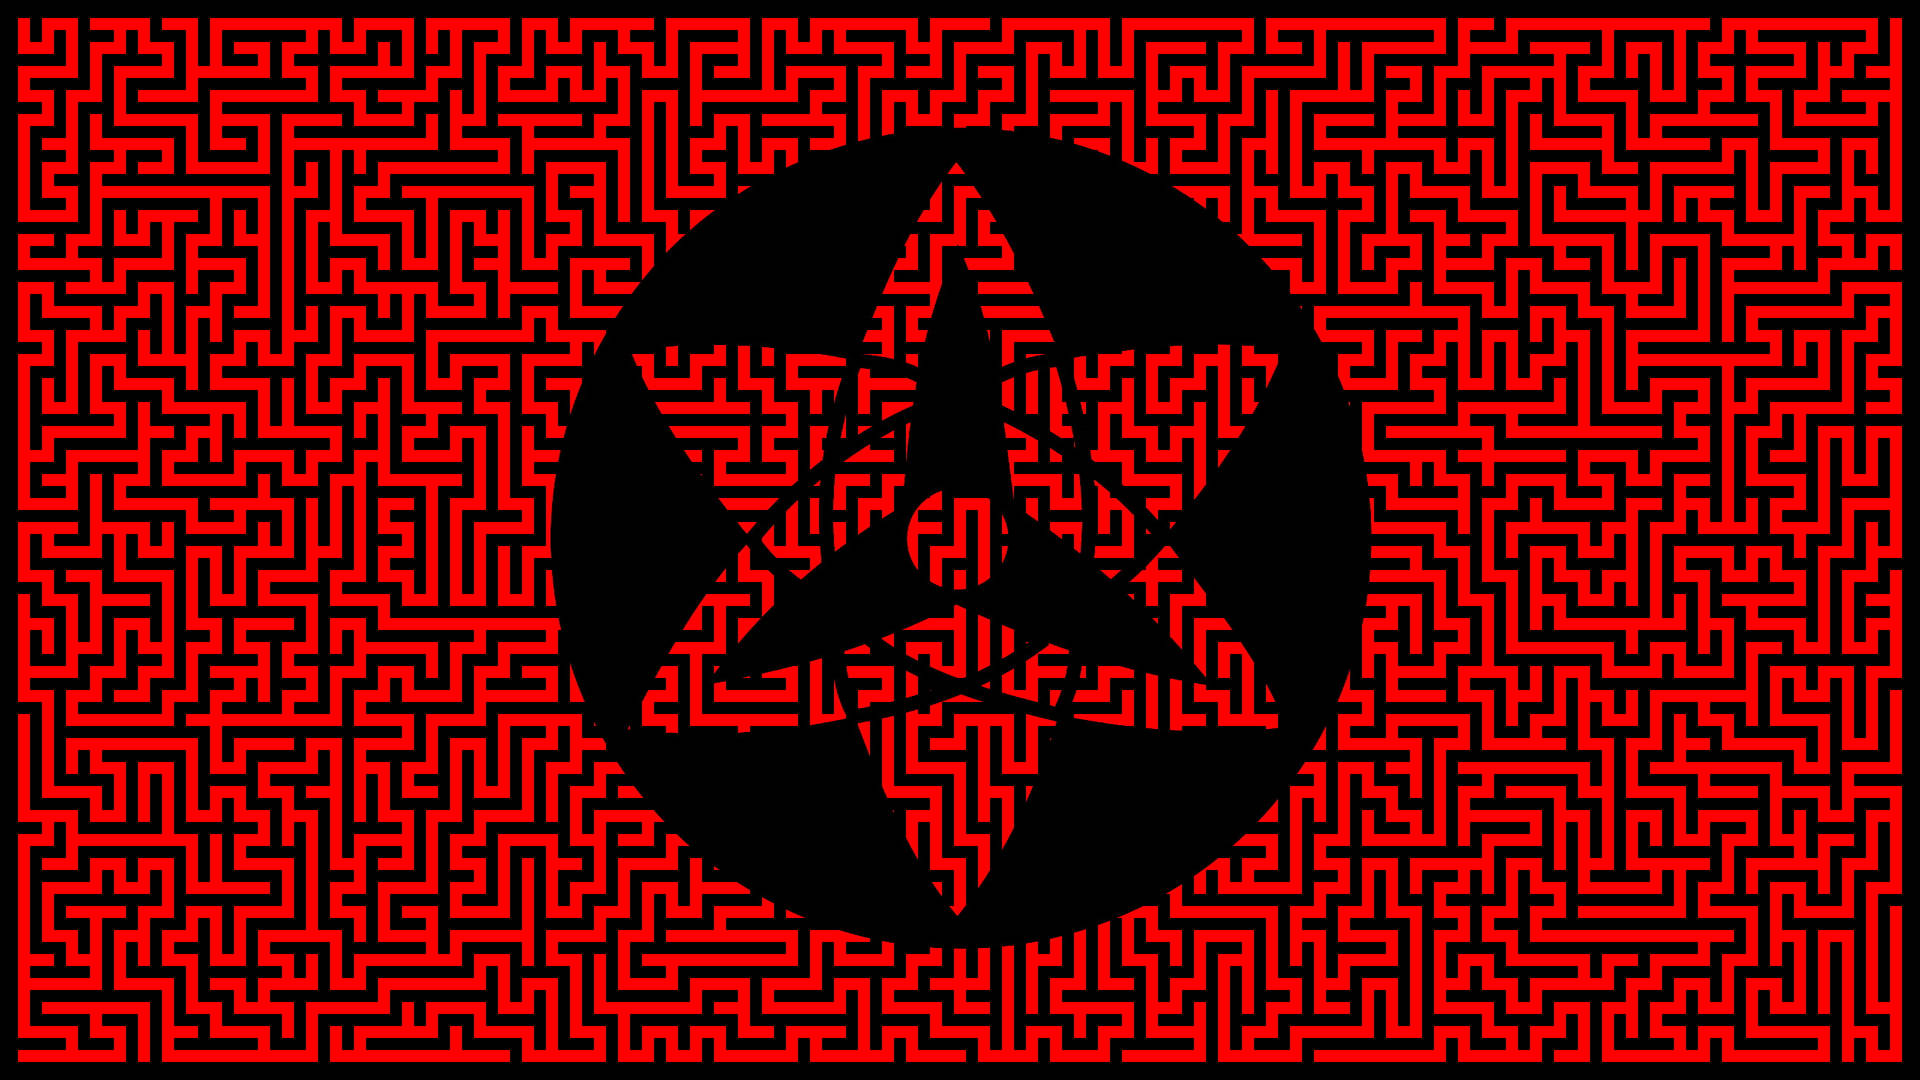 Get Lost In The Sharingan Maze